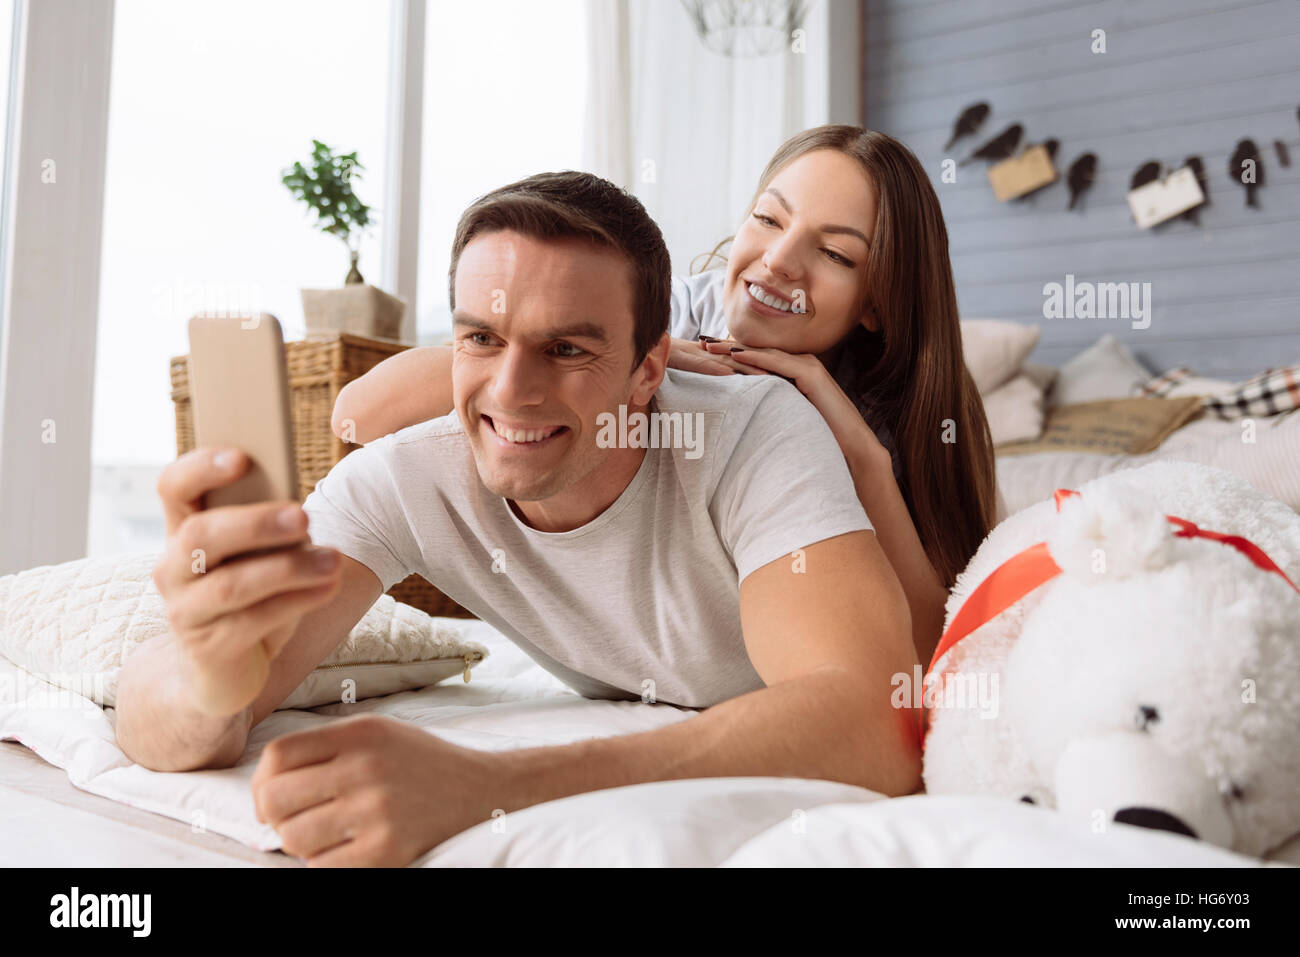 Cheerful handsome man taking a selfie Stock Photo